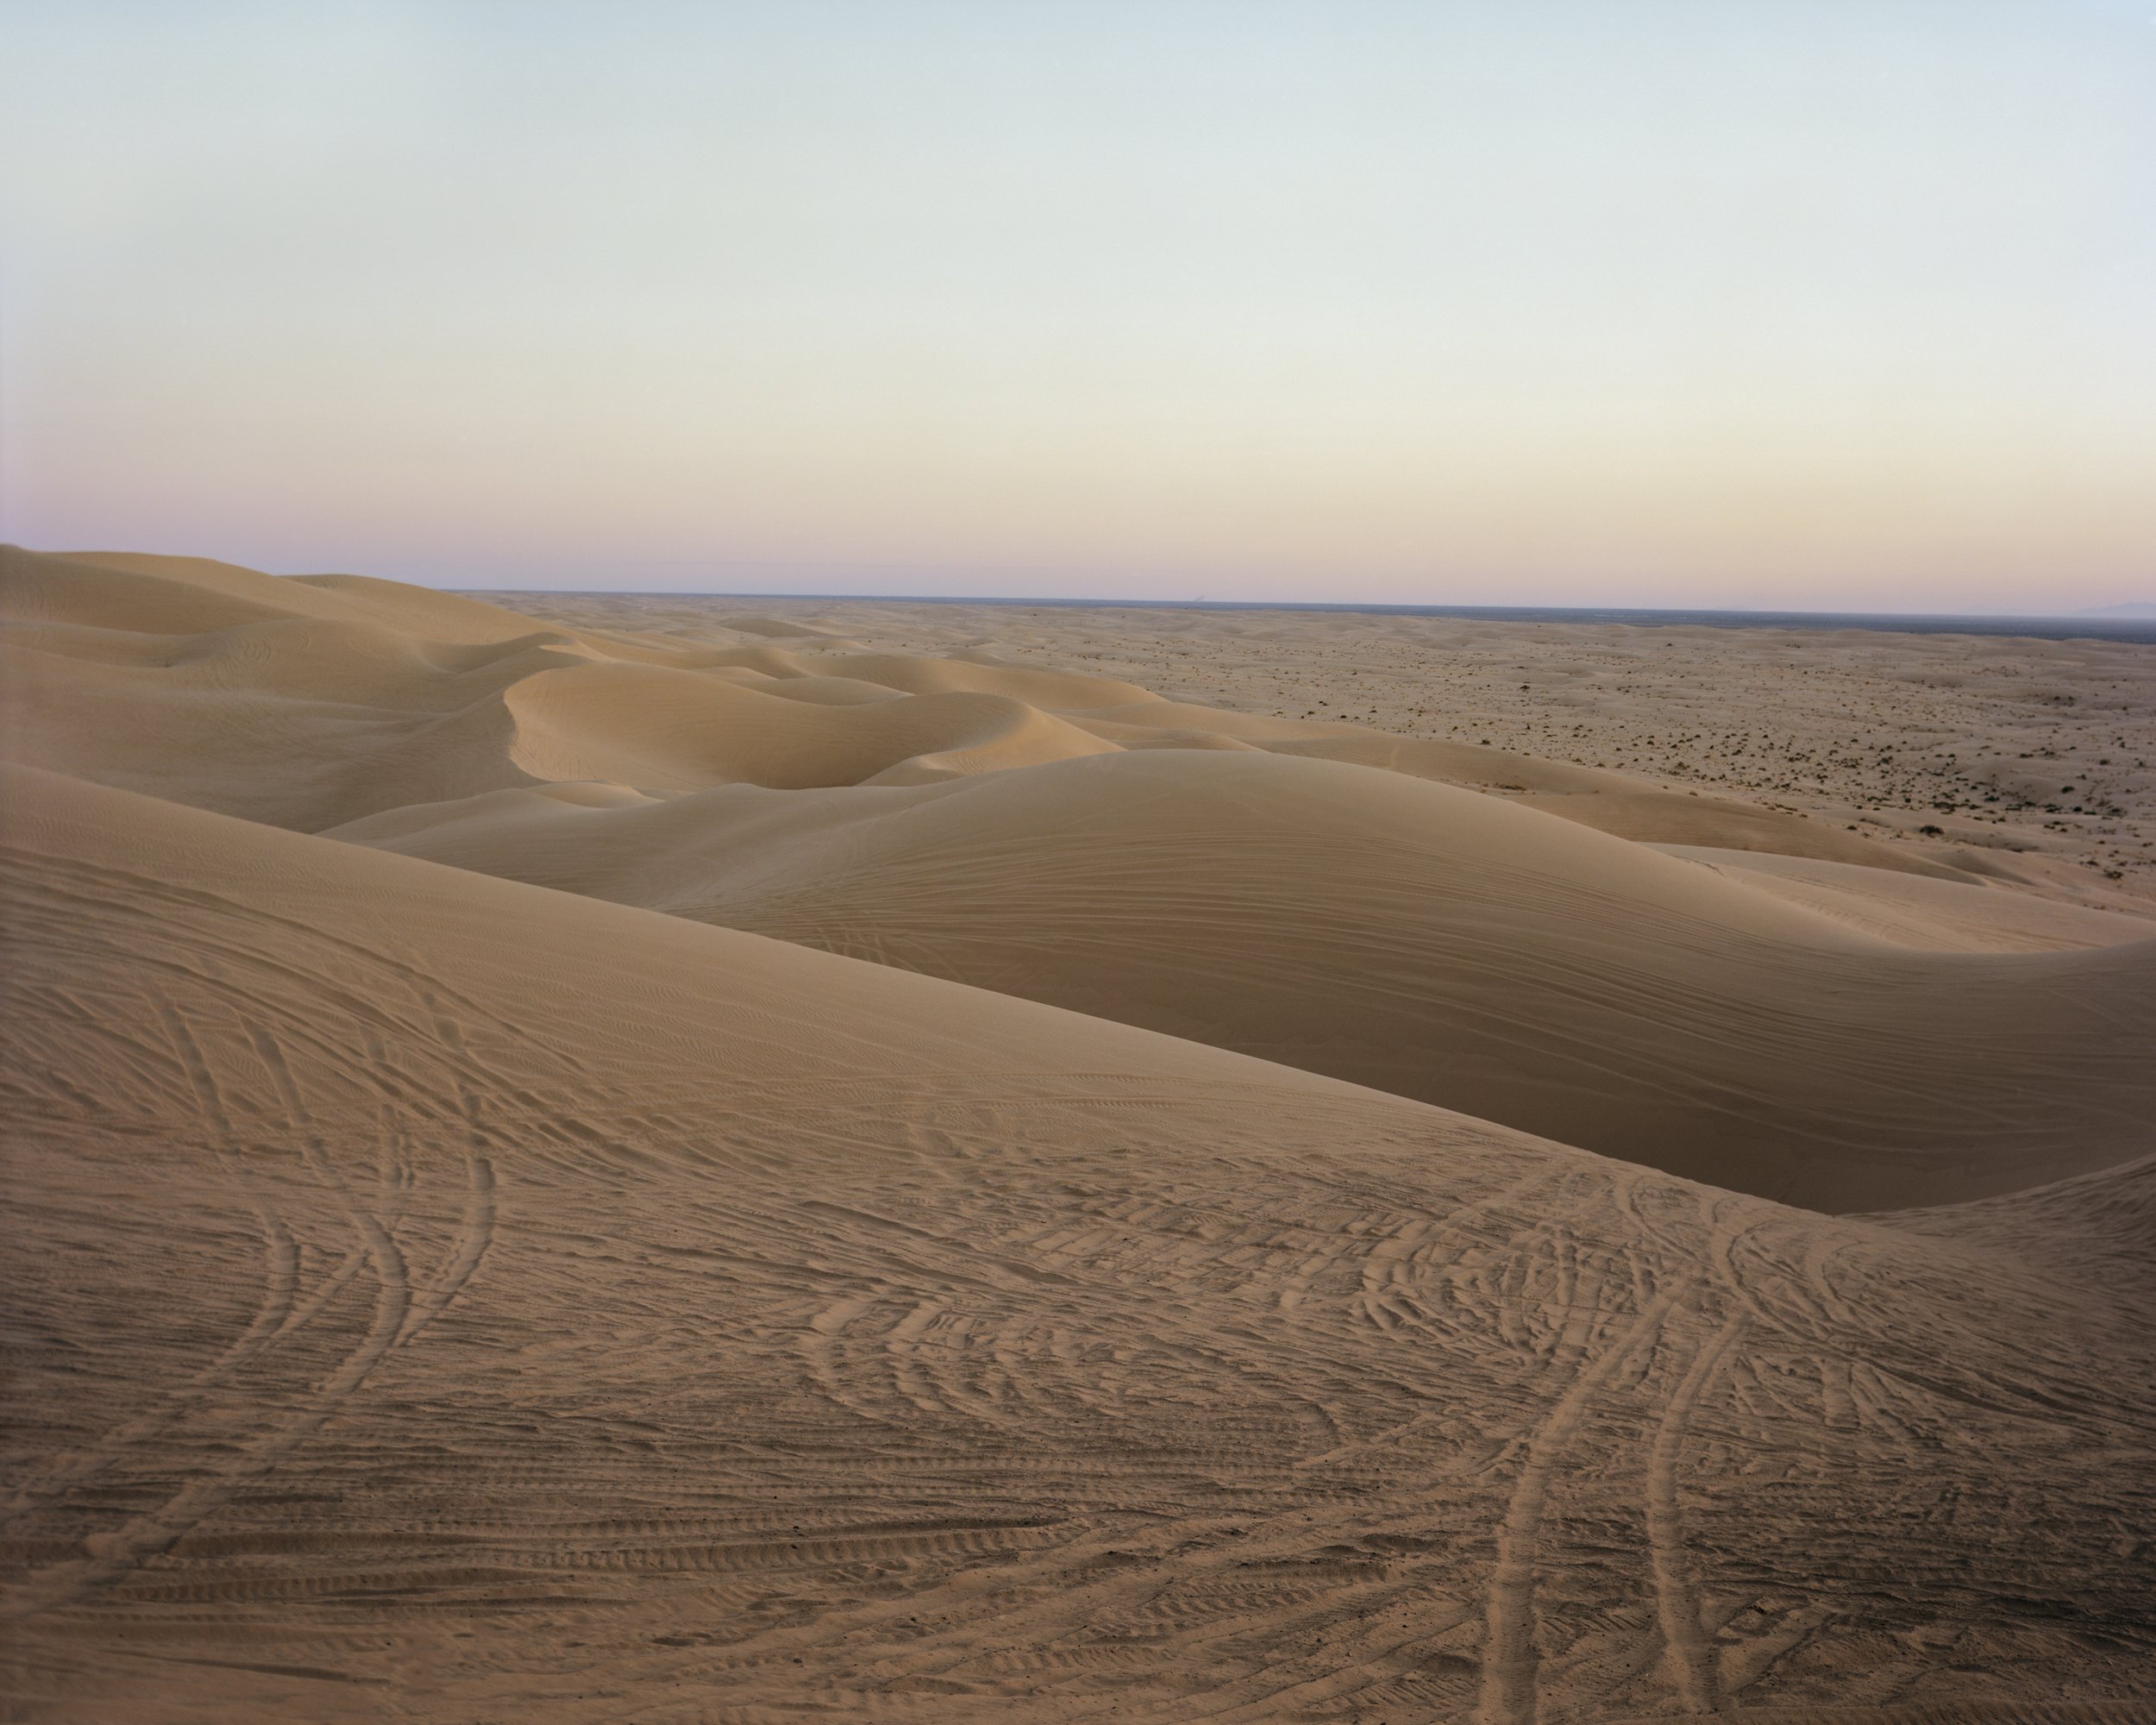  Dunes with Marks, 2020 Archival pigment print   Writing    Film    Installation  